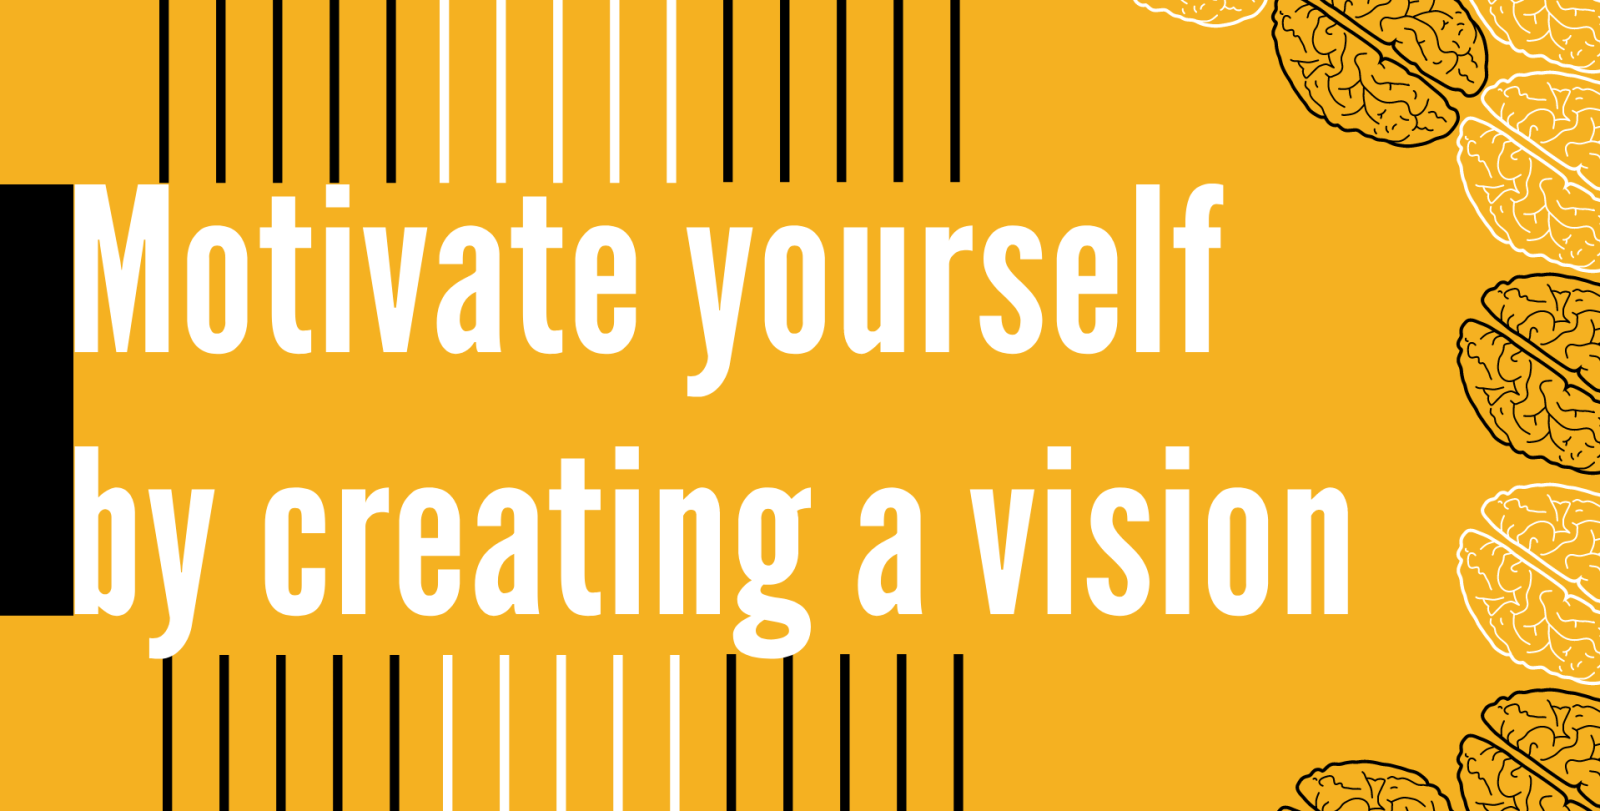 Motivate yourself by creating a vision